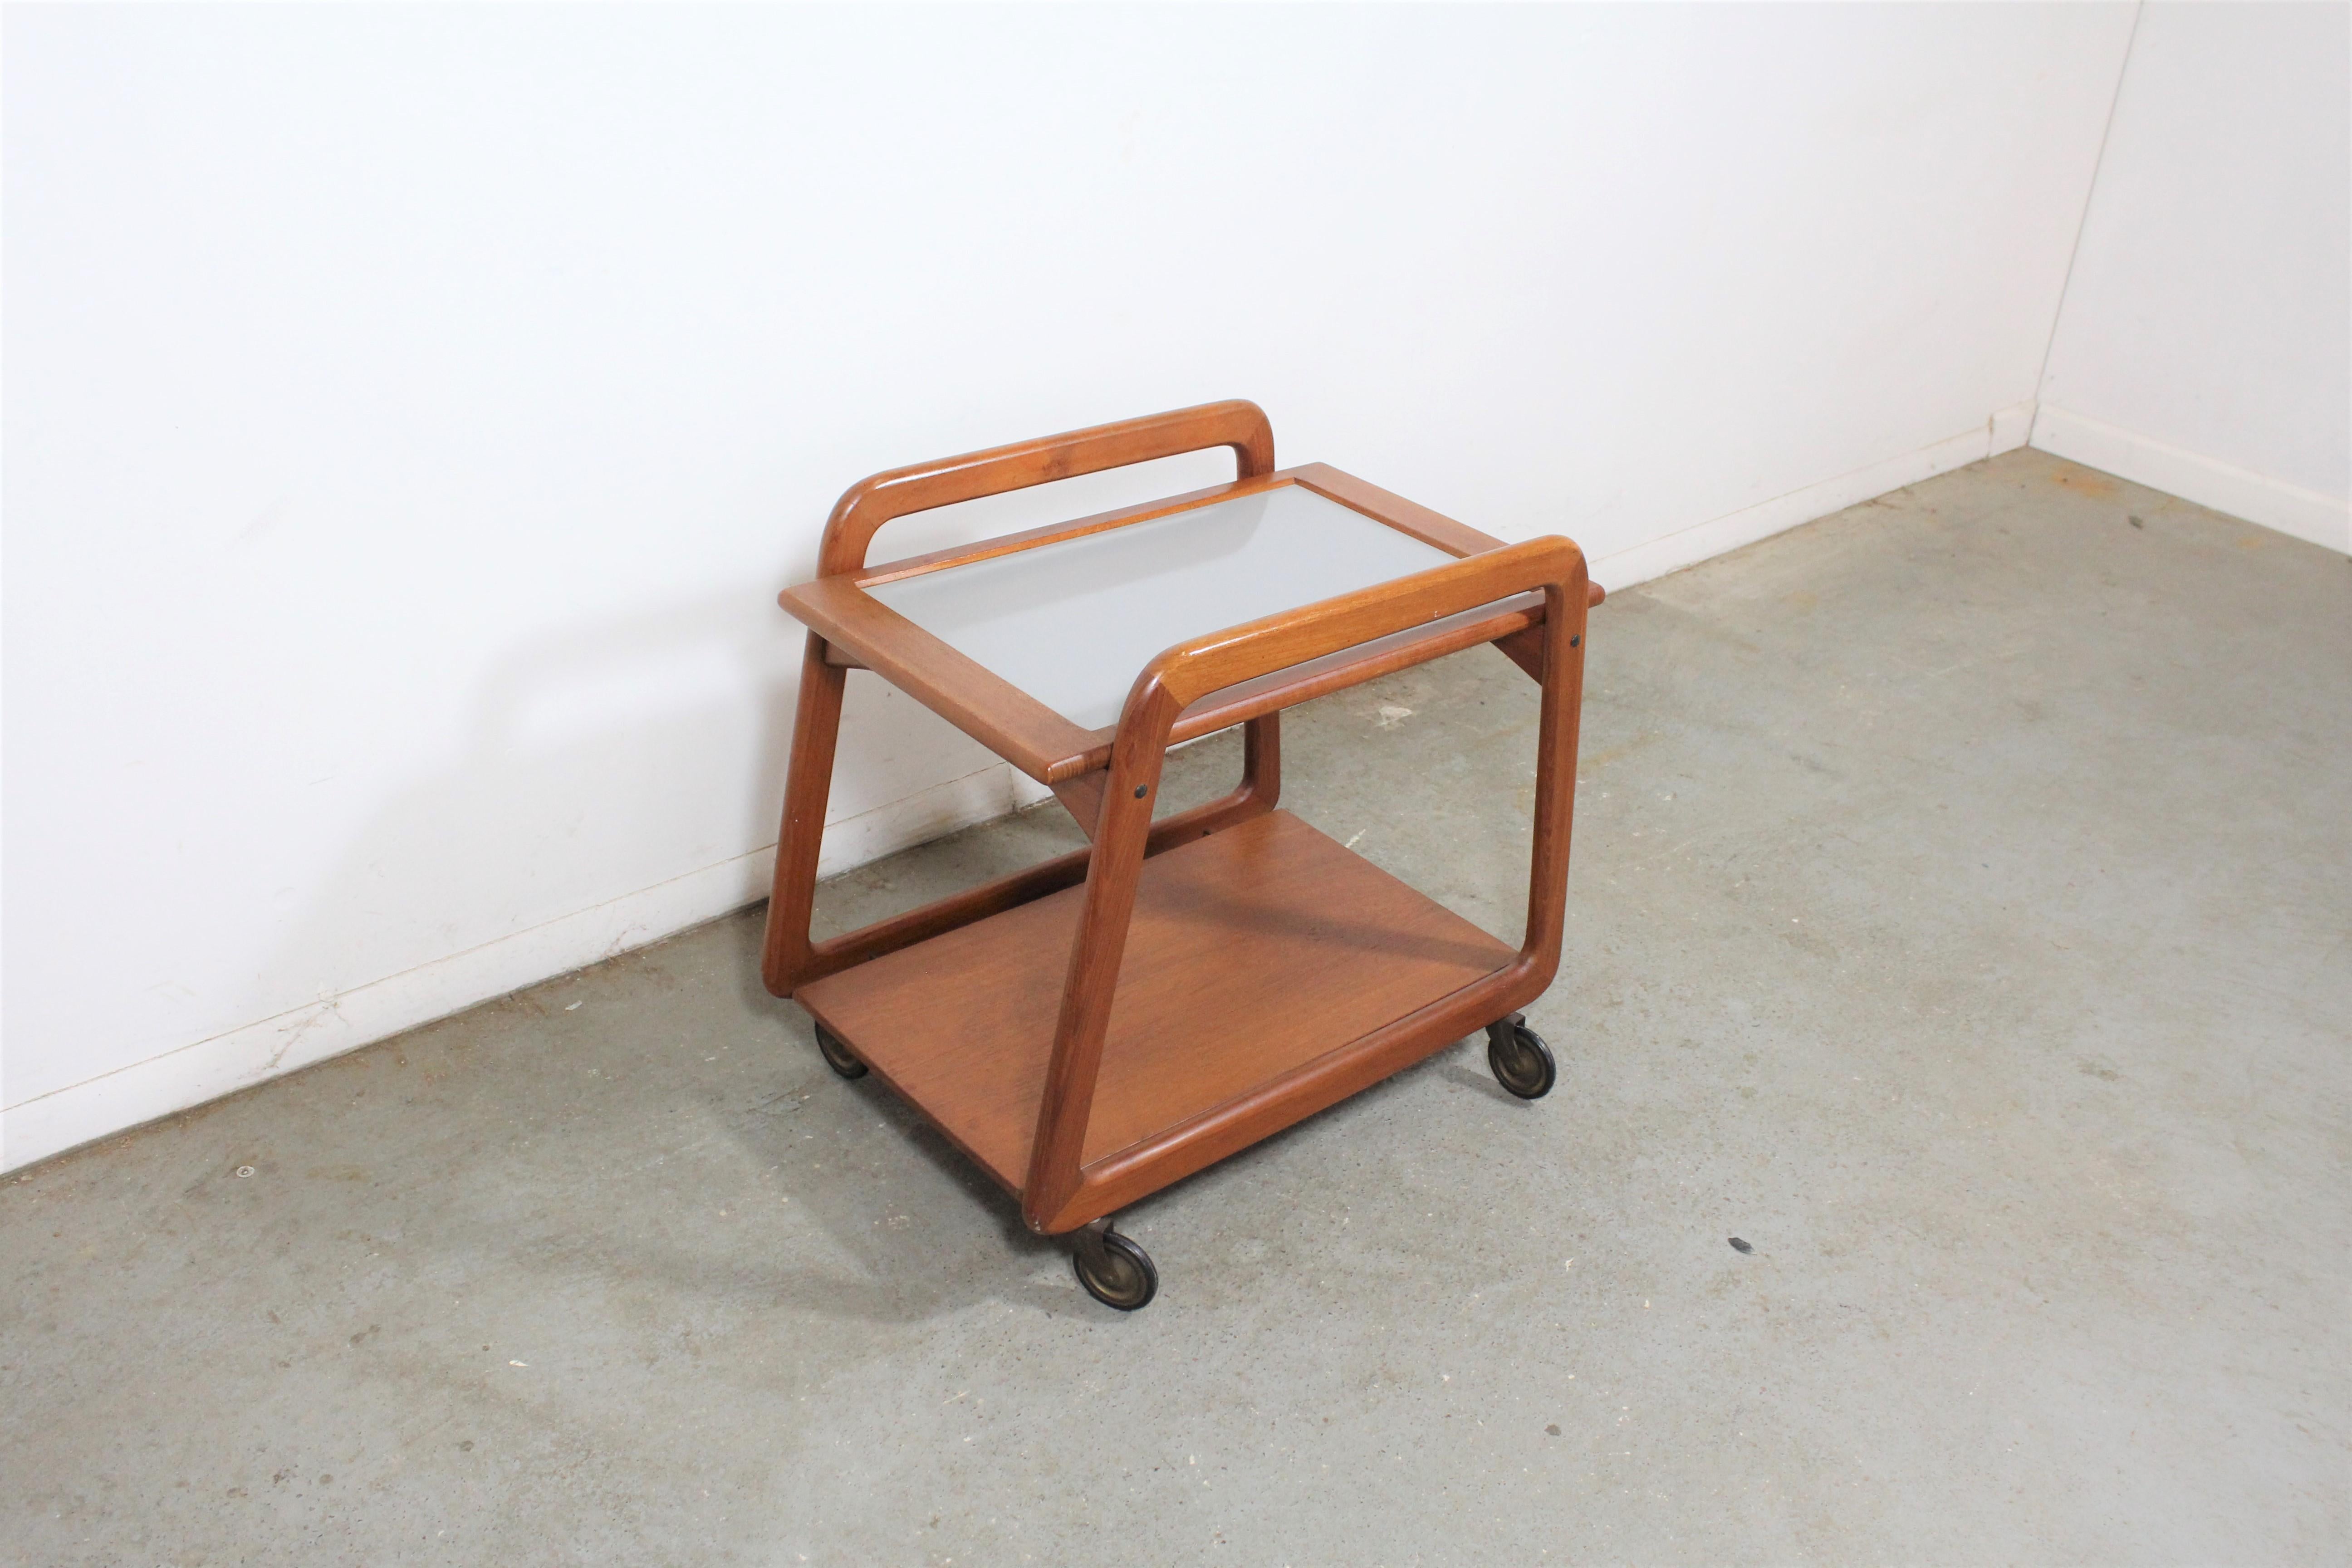 Danish modern teak tea bar/cart.

Offered is a vintage Danish modern bar cart on wheels. Great for storage, serving drinks, or food. It is in good vintage condition, showing some age wear (minor surface wear/scratches, age wear--see pictures). It